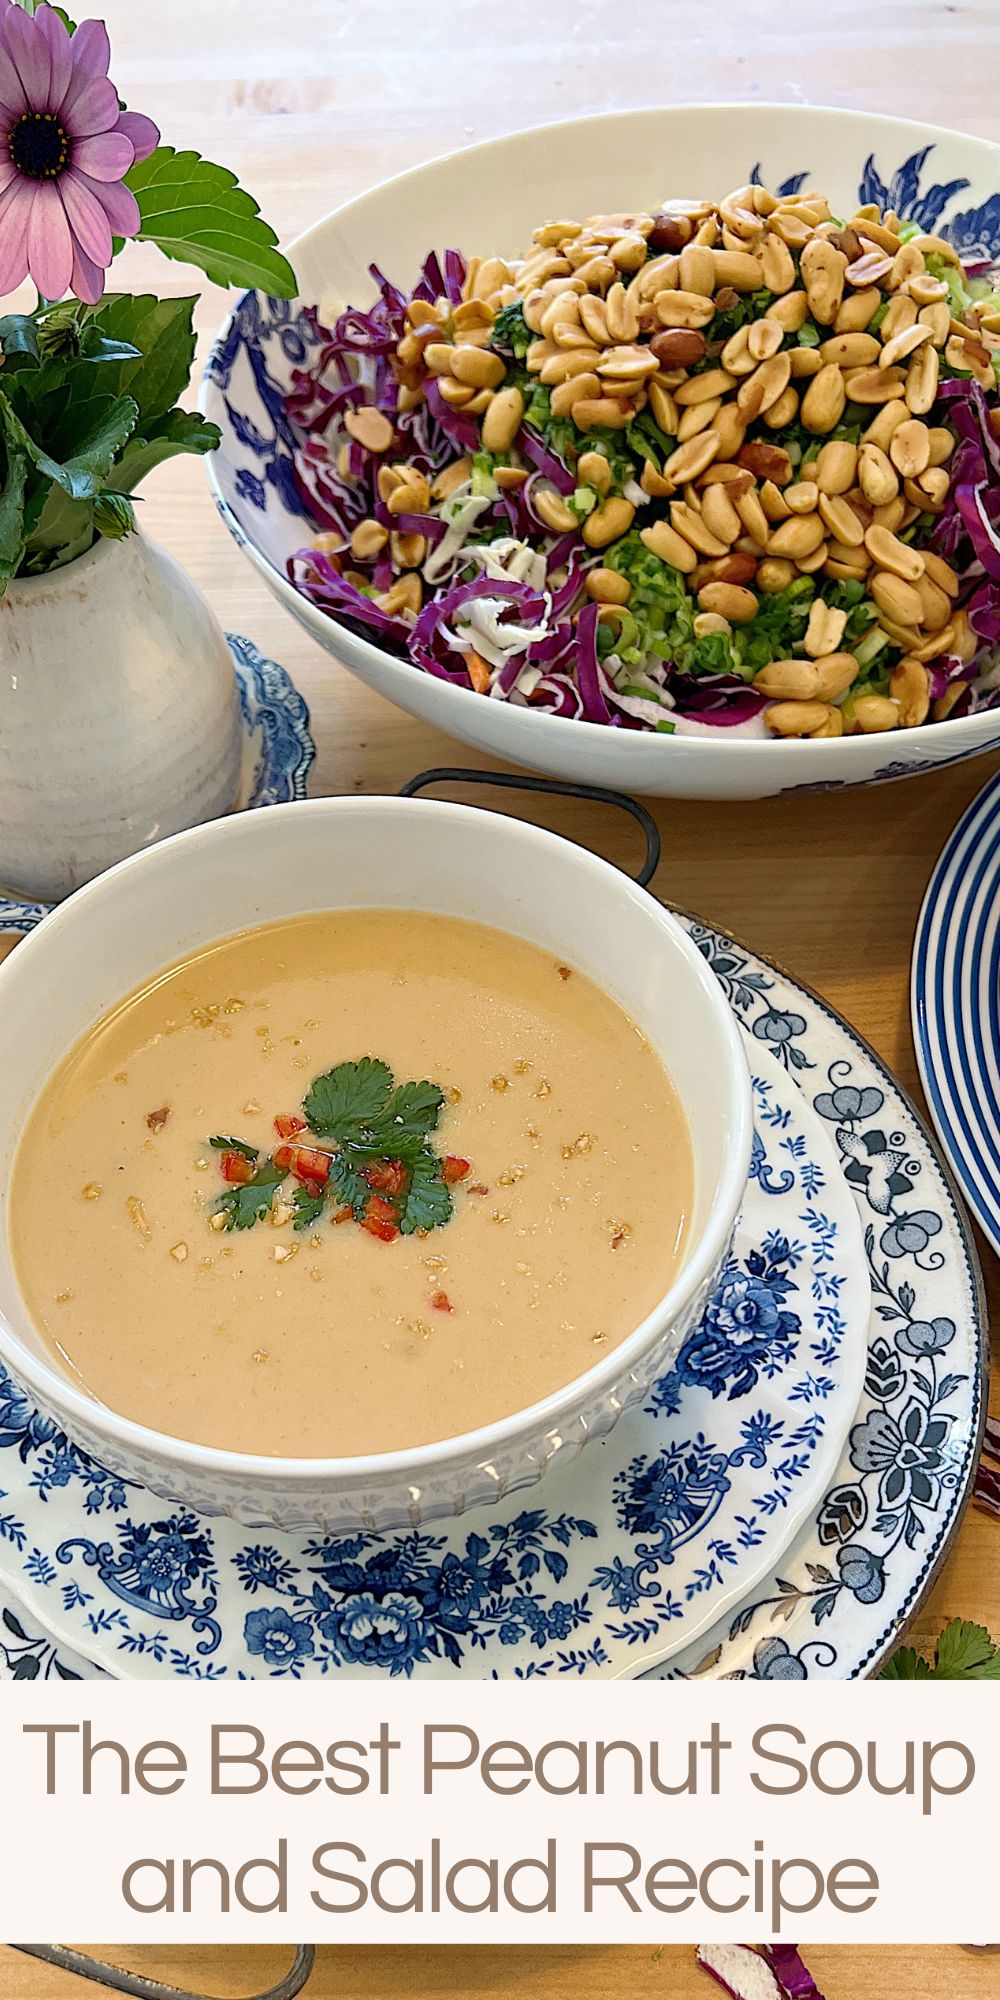 This is the perfect time of year for soup and salad. Today I am sharing recipes for a crunchy coleslaw salad paired with a warm peanut soup. 